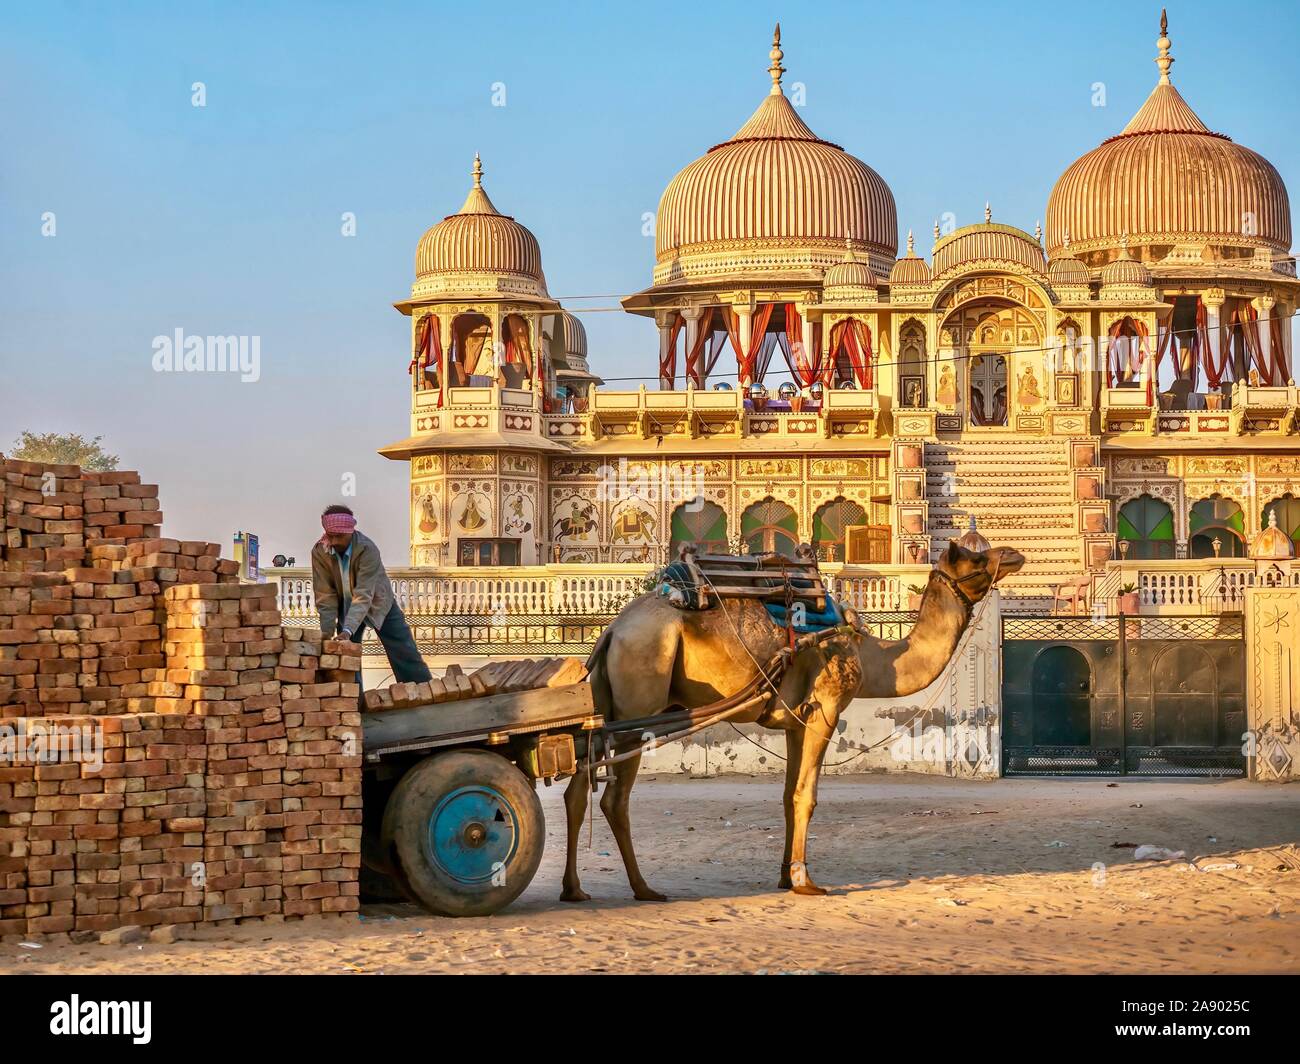 Bricks being unloaded by a delivery man from a cart harnessed to a camel in front of a beautifully restored haveli palace. Mandawa, Rajasthan, India. Stock Photo